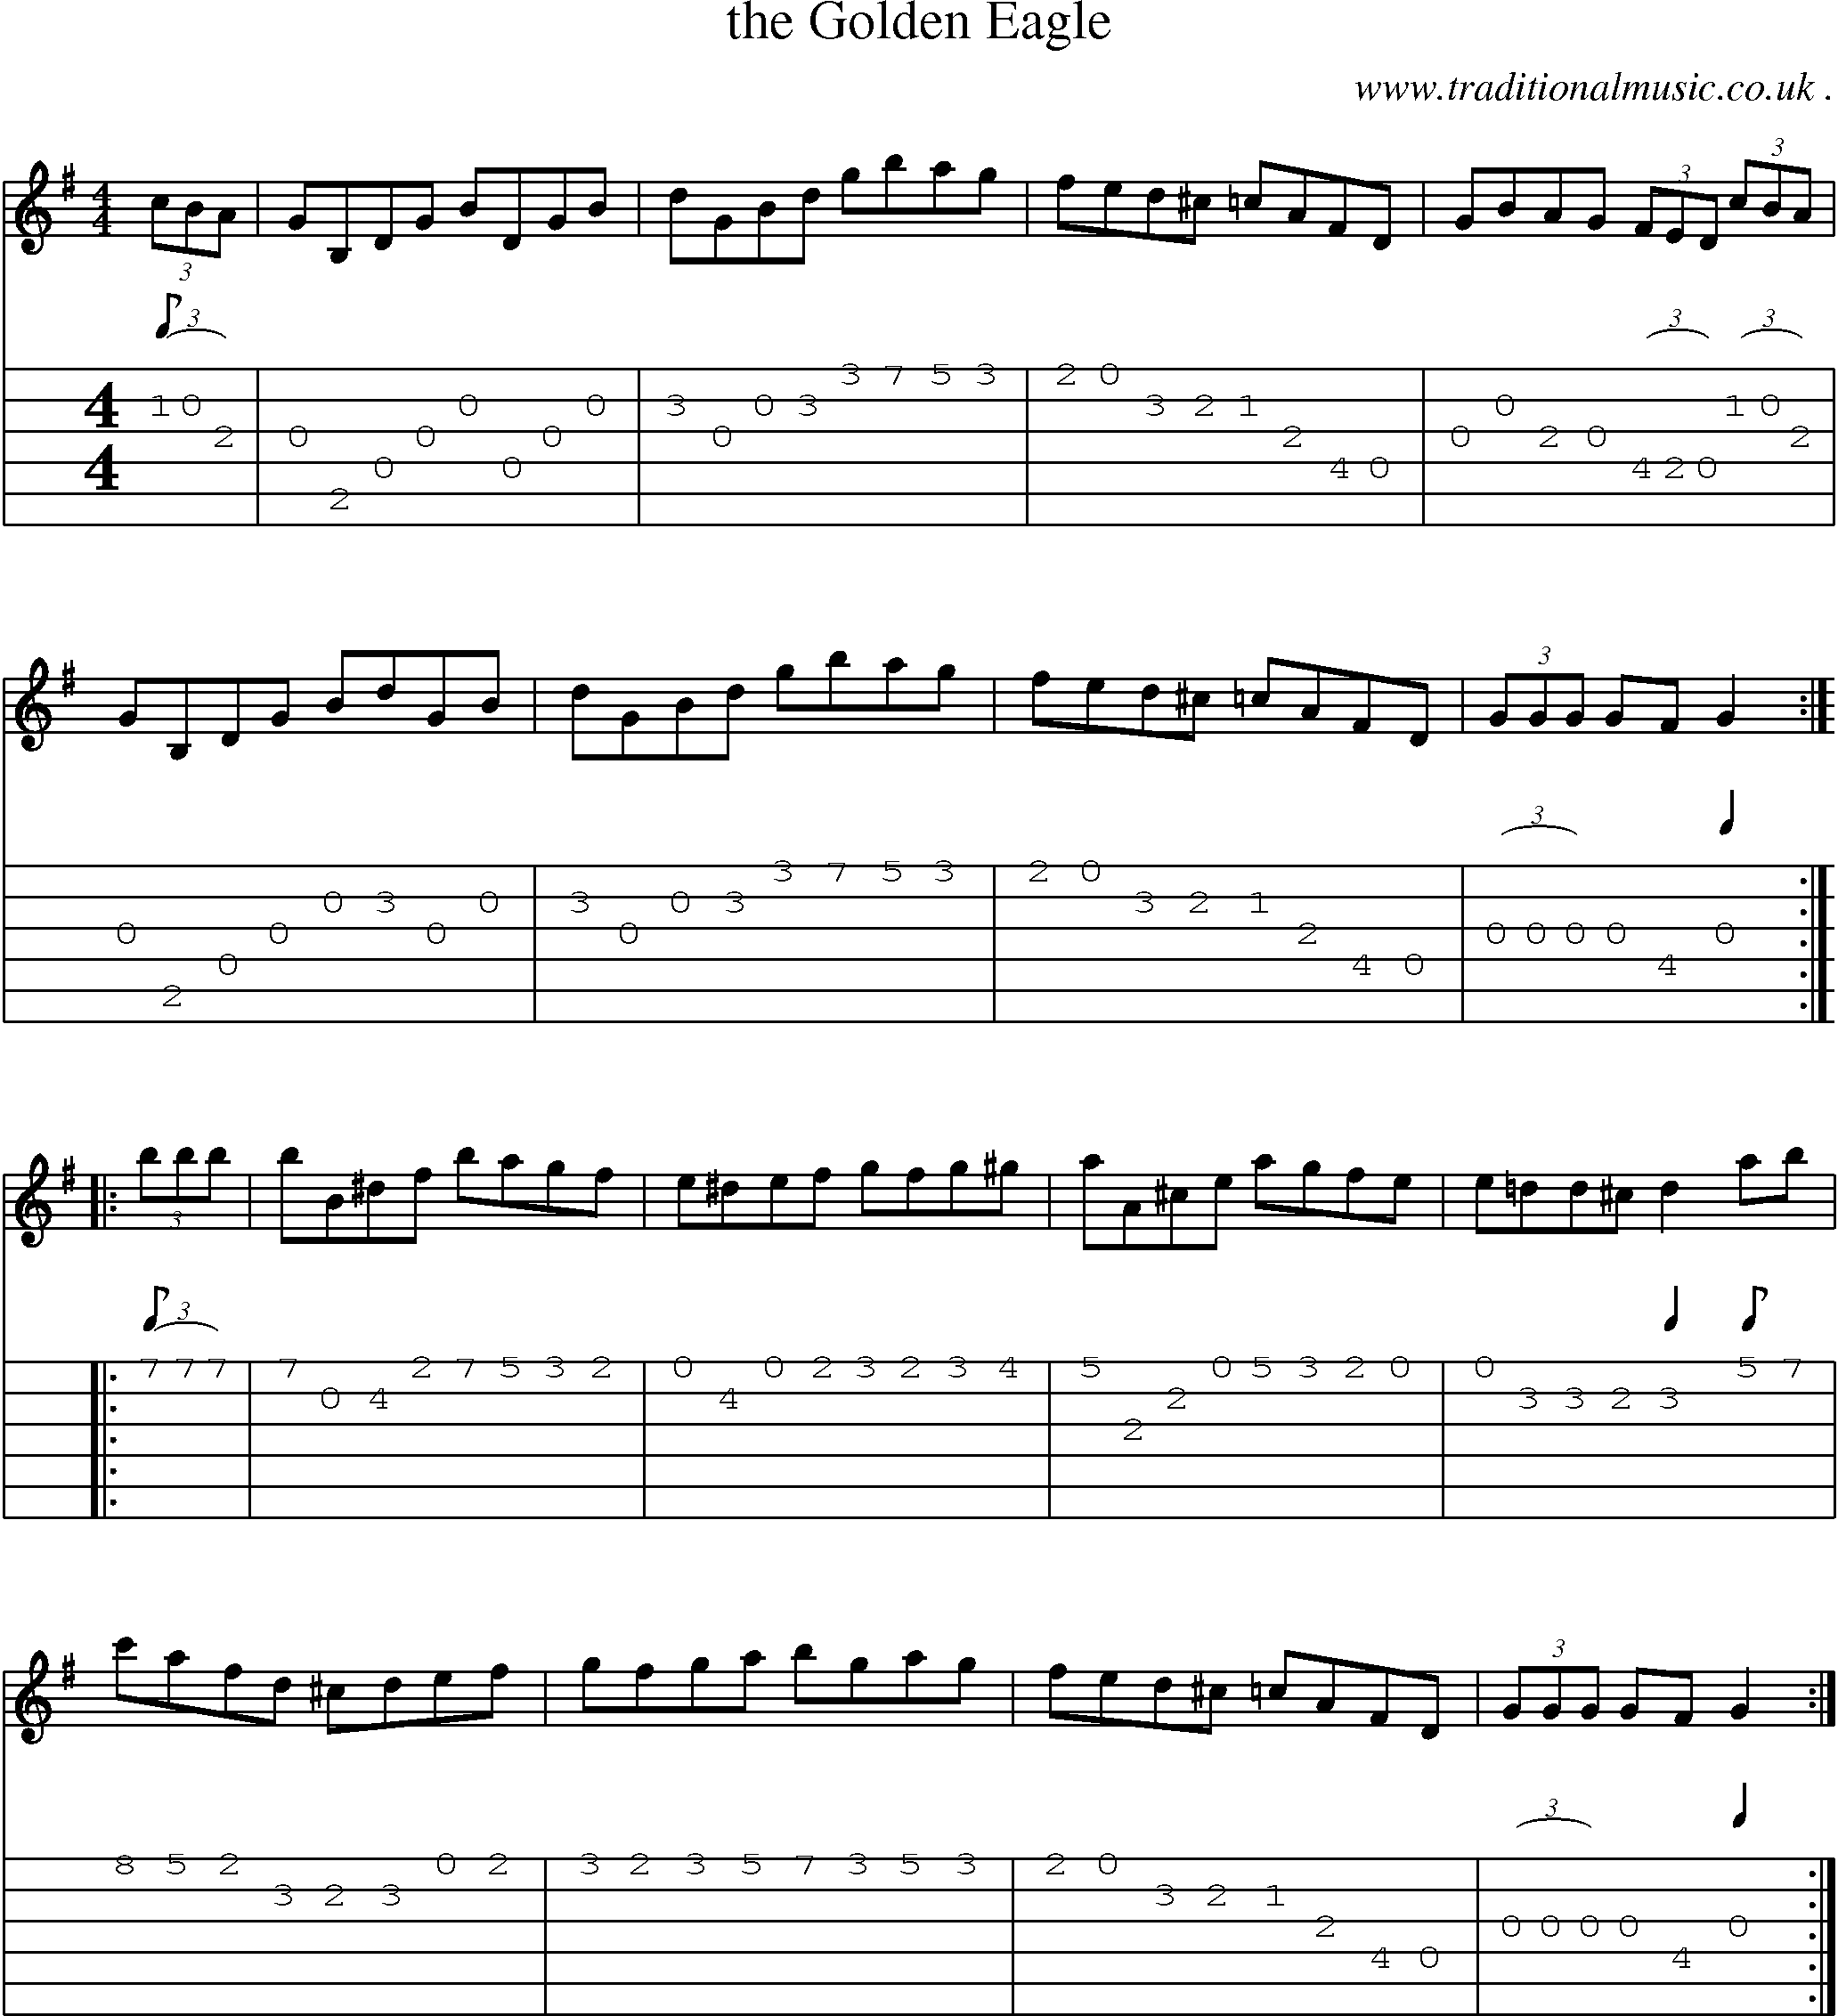 Sheet-Music and Guitar Tabs for The Golden Eagle